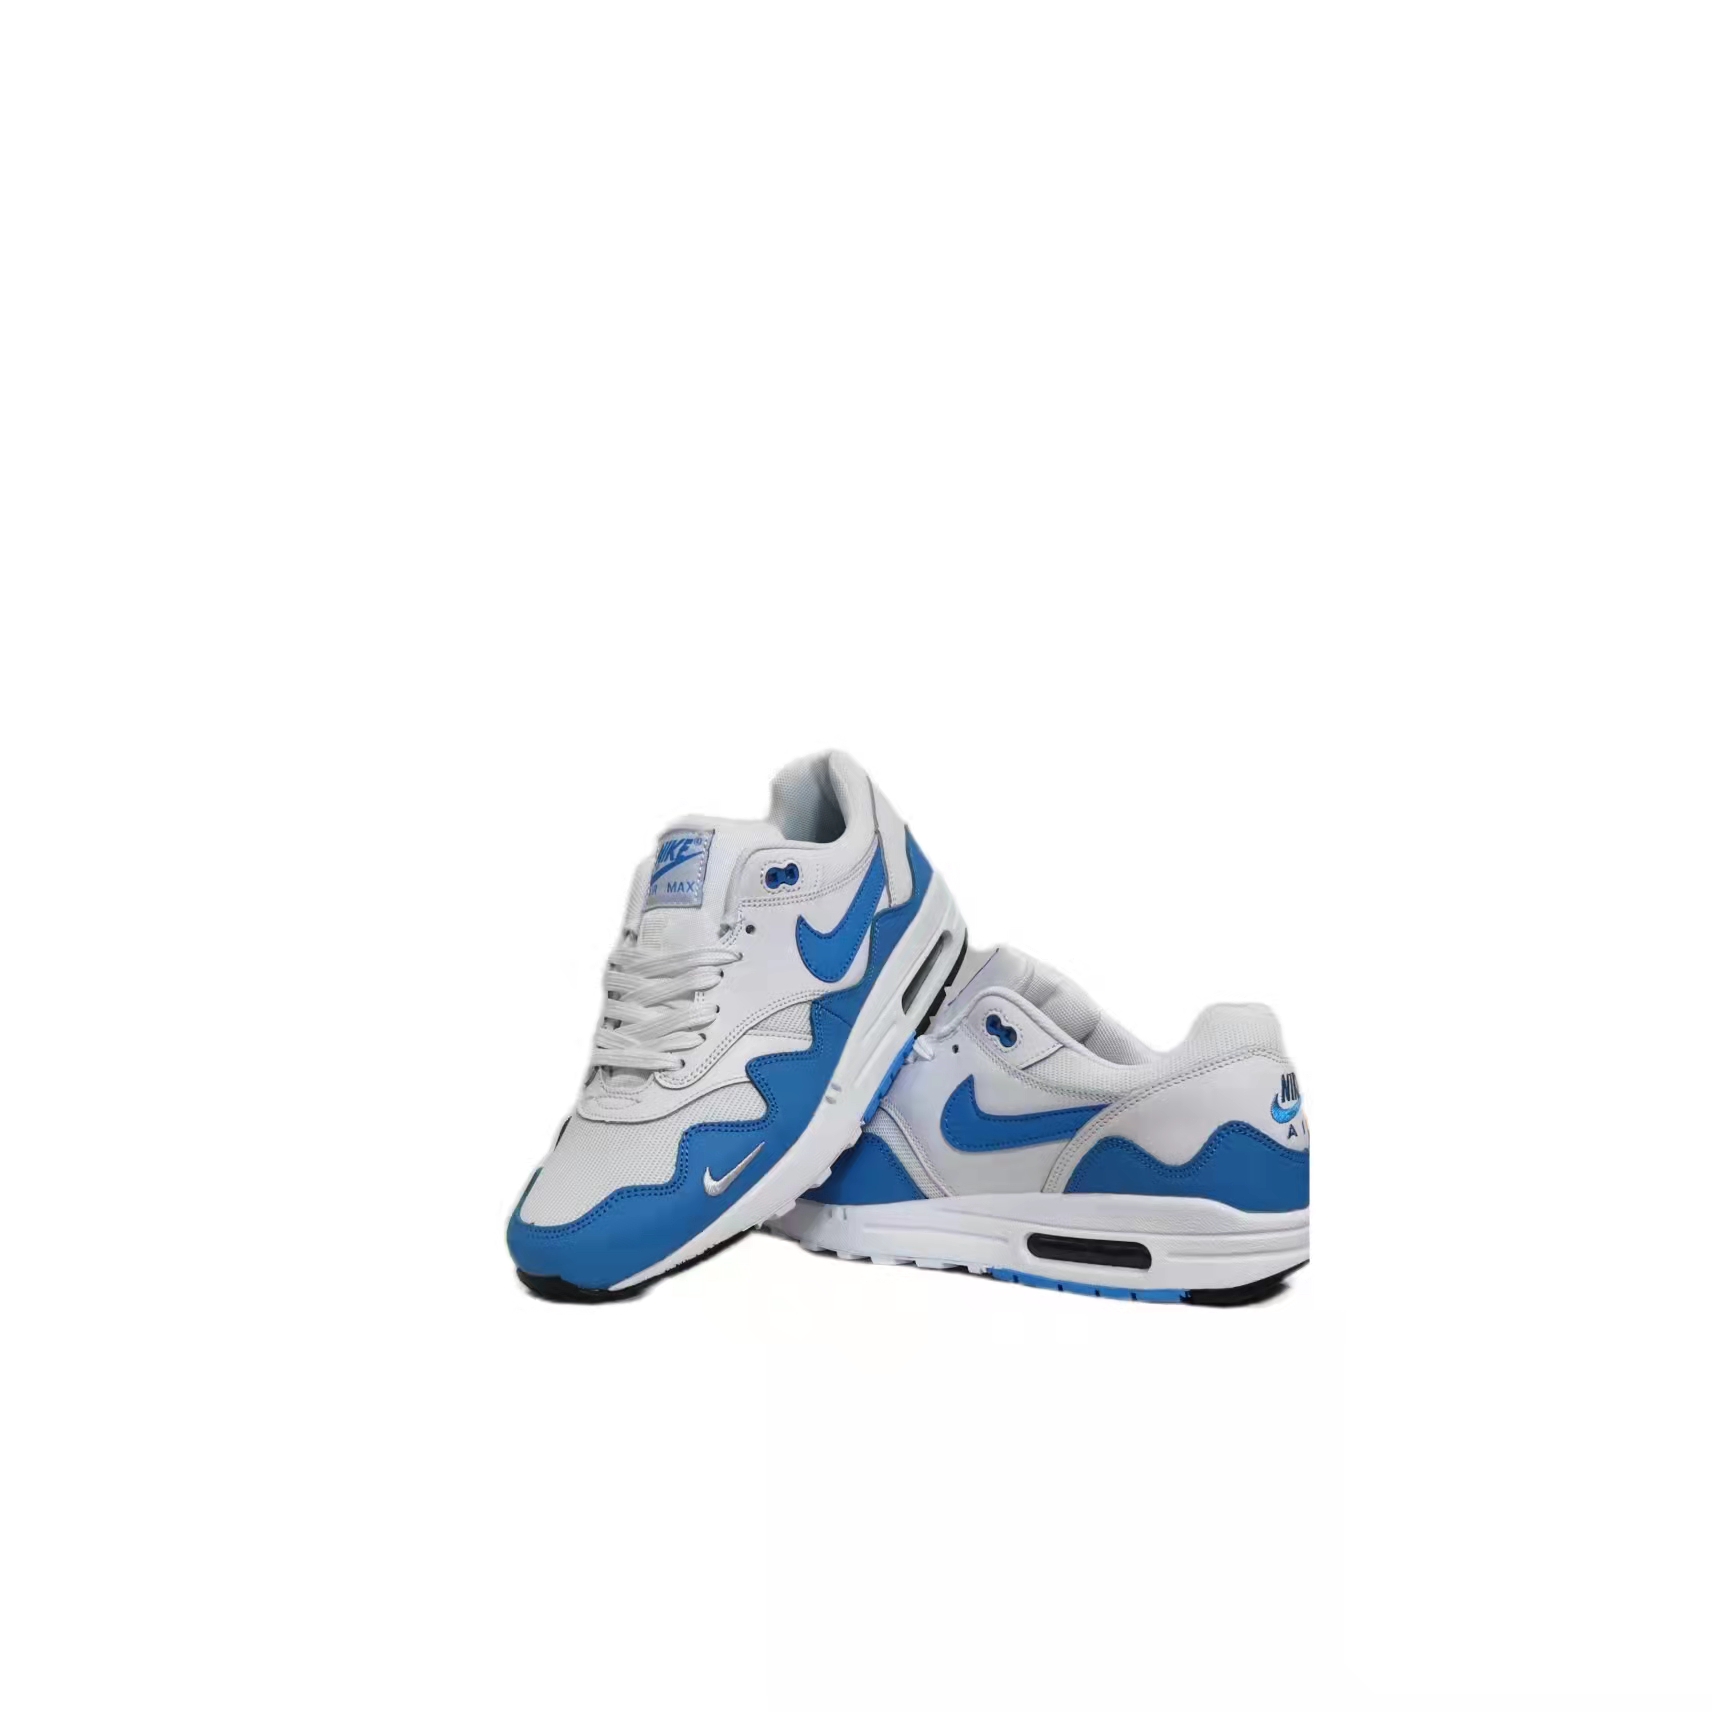 New Nike Air Max 87 Grey Blue White Shoes